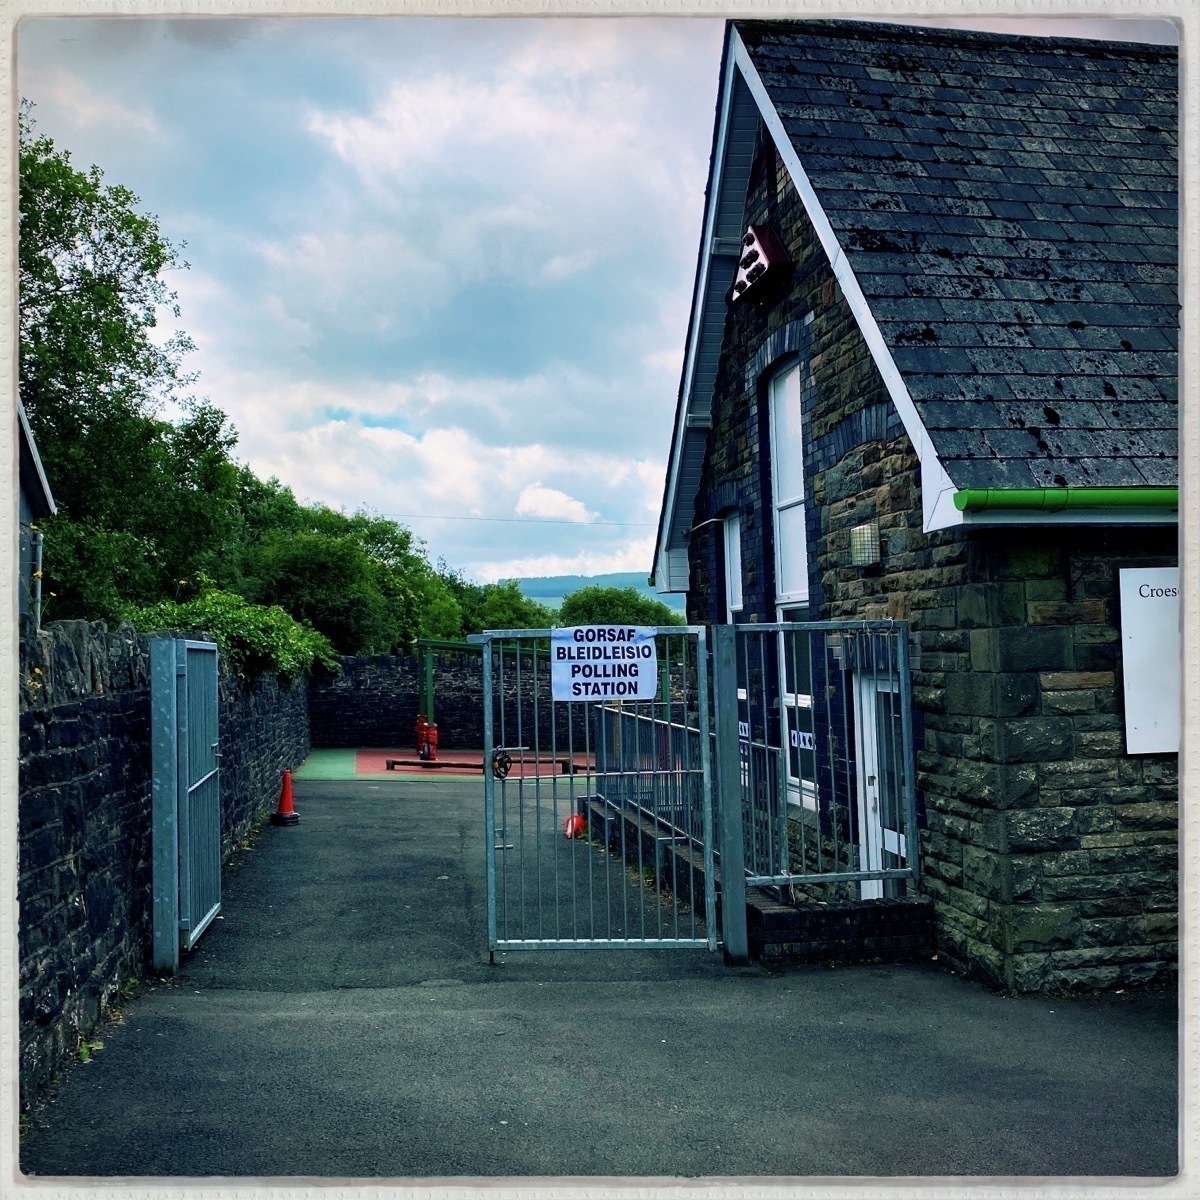 A stone building with a slate roof, serving as a polling station, is situated behind a gated entrance with surrounding greenery under a cloudy sky